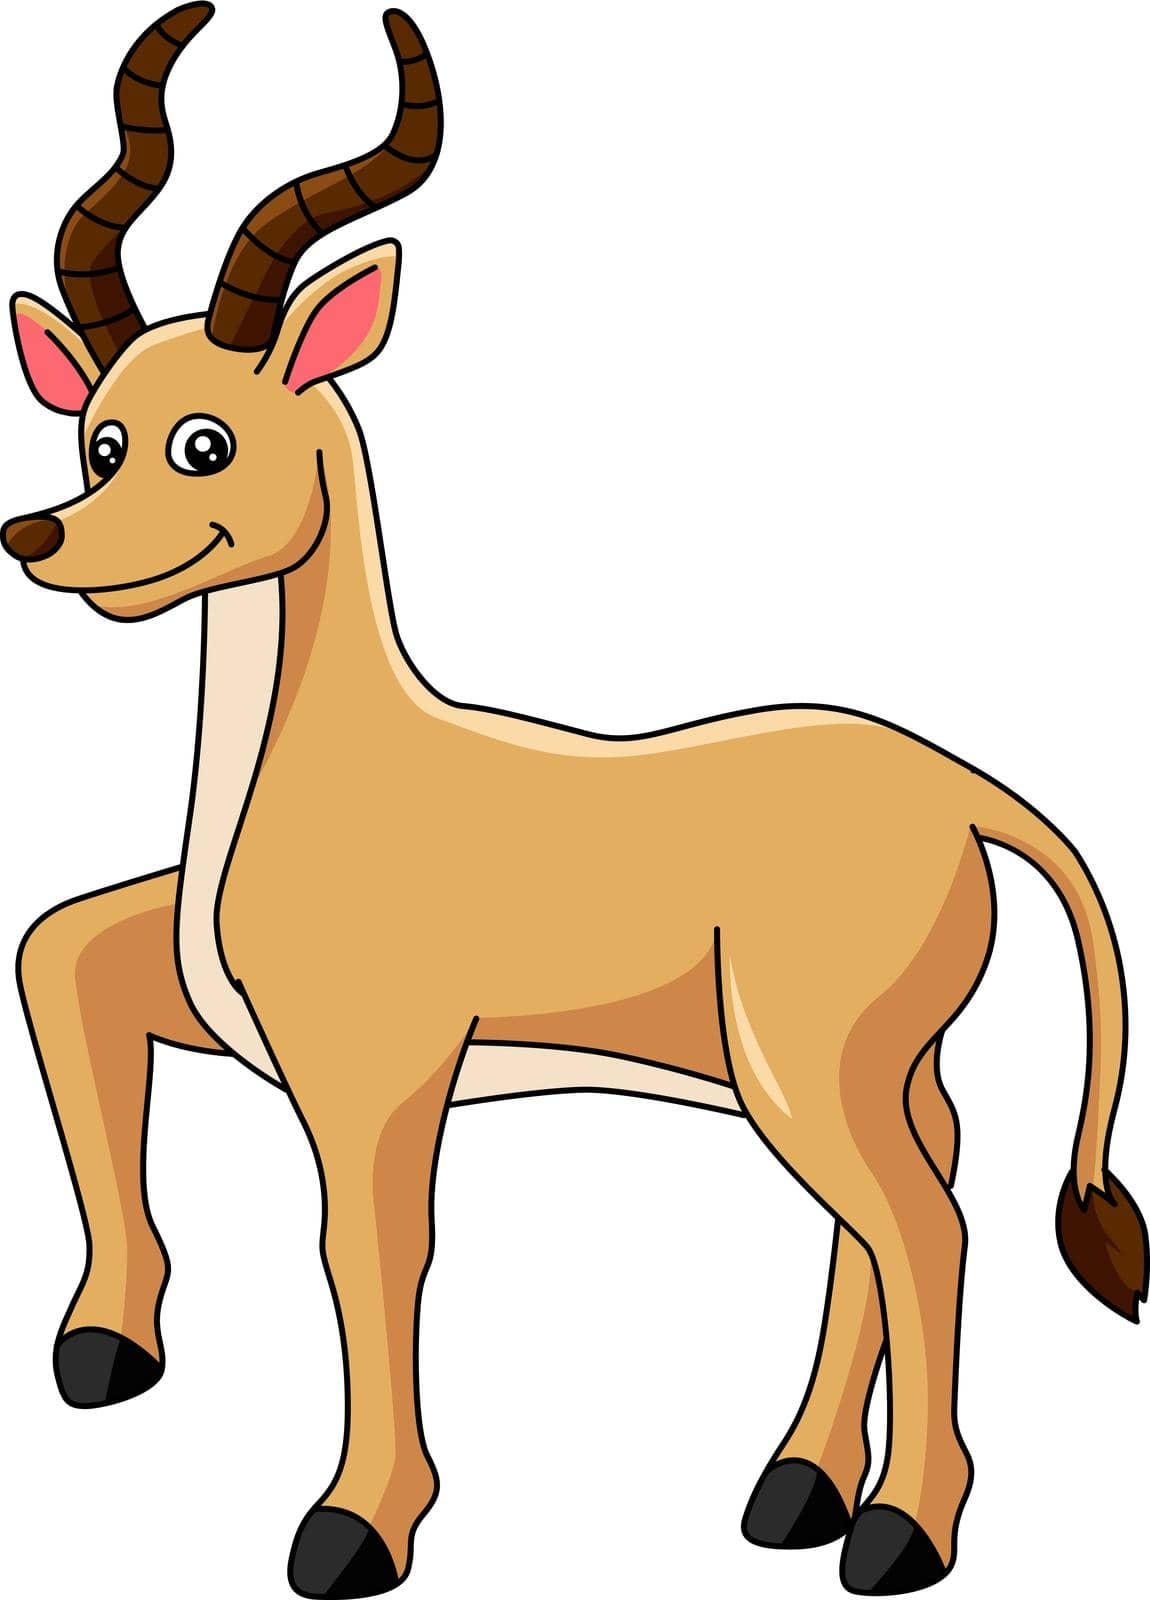 This cartoon clipart shows an antelope vector illustration.